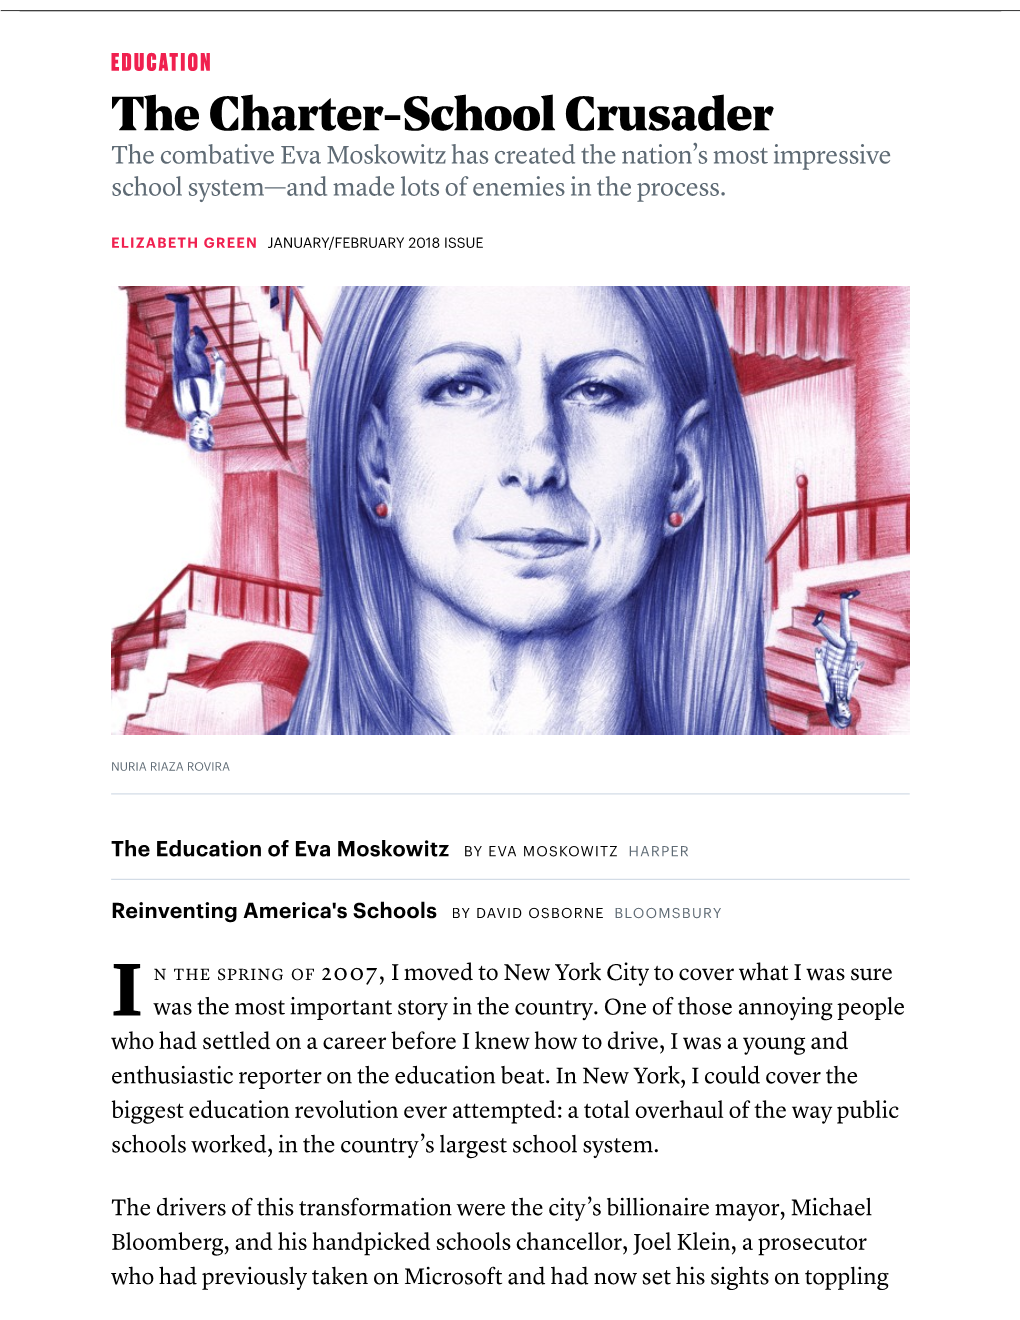 The Charter-School Crusader the Combative Eva Moskowitz Has Created the Nation’S Most Impressive School System—And Made Lots of Enemies in the Process